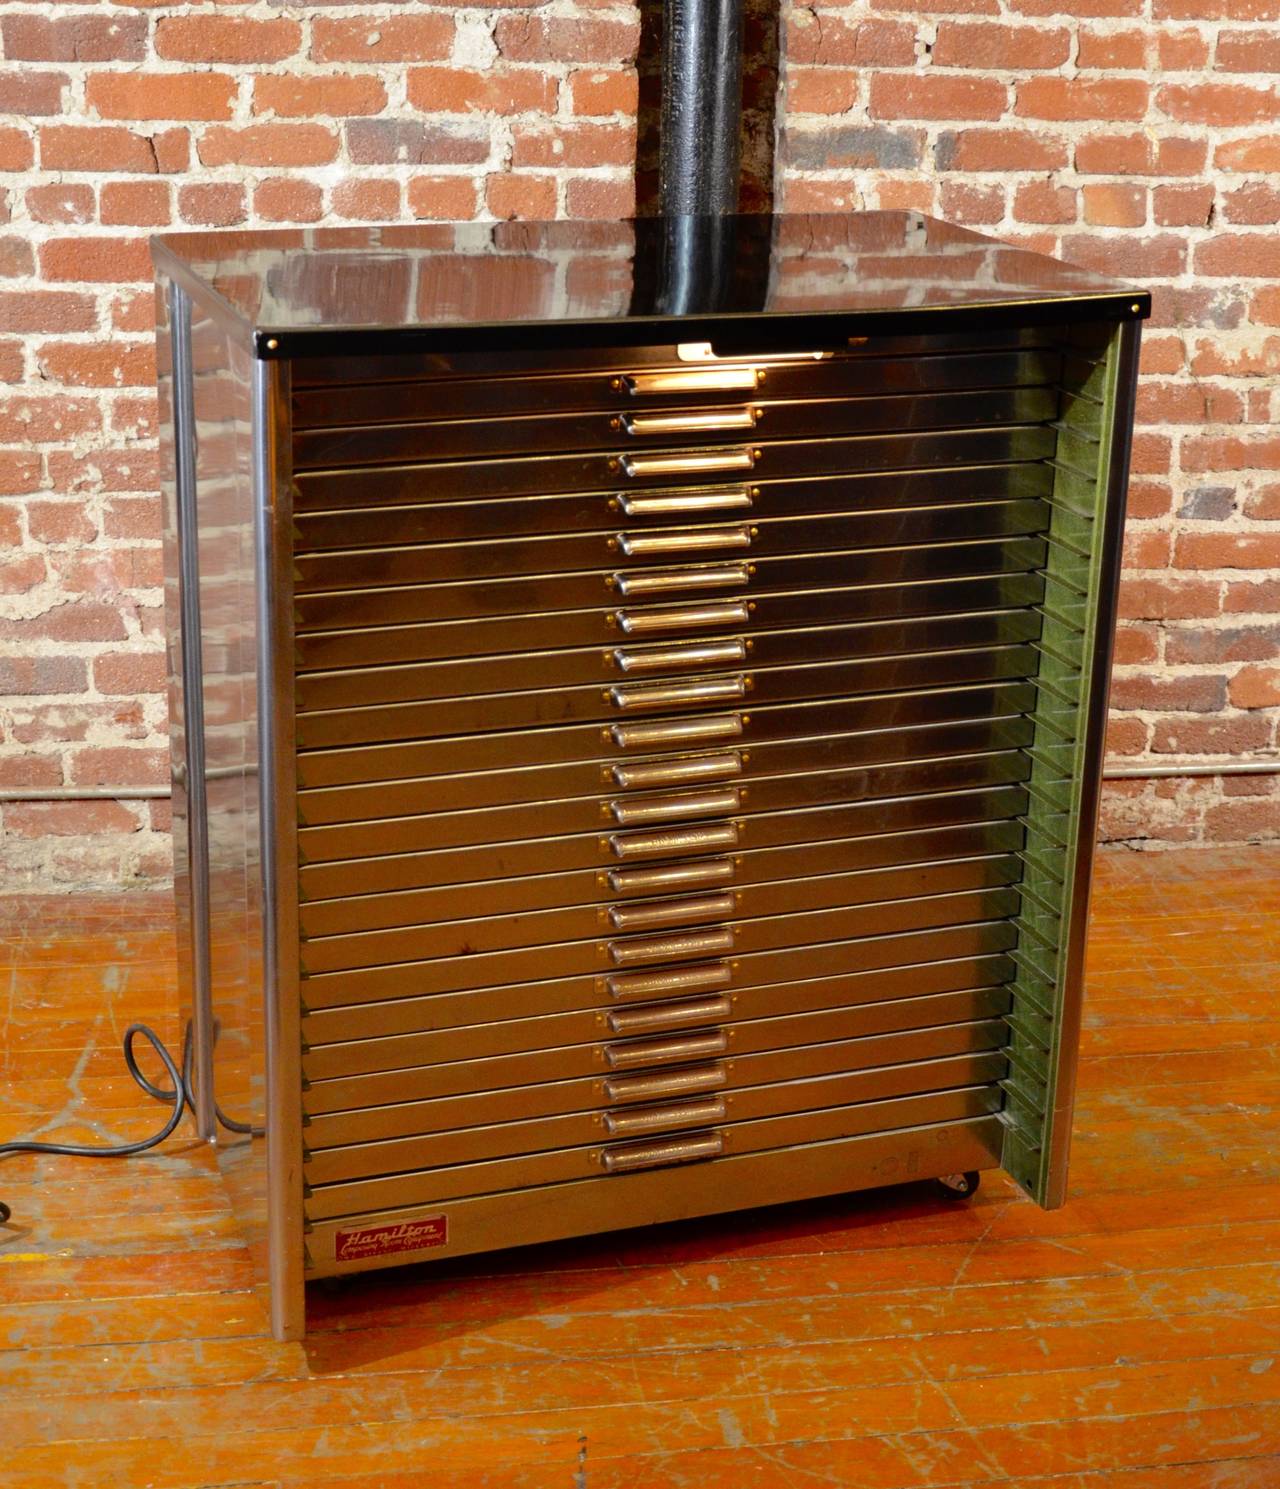 *This item is eligible for FREE domestic shipping through December. Please contact Polished Modern for details.* Handsome polished steel printers cabinet by Hamiton Composing Room Equipment. The cabinet drawers are partitioned into neat little